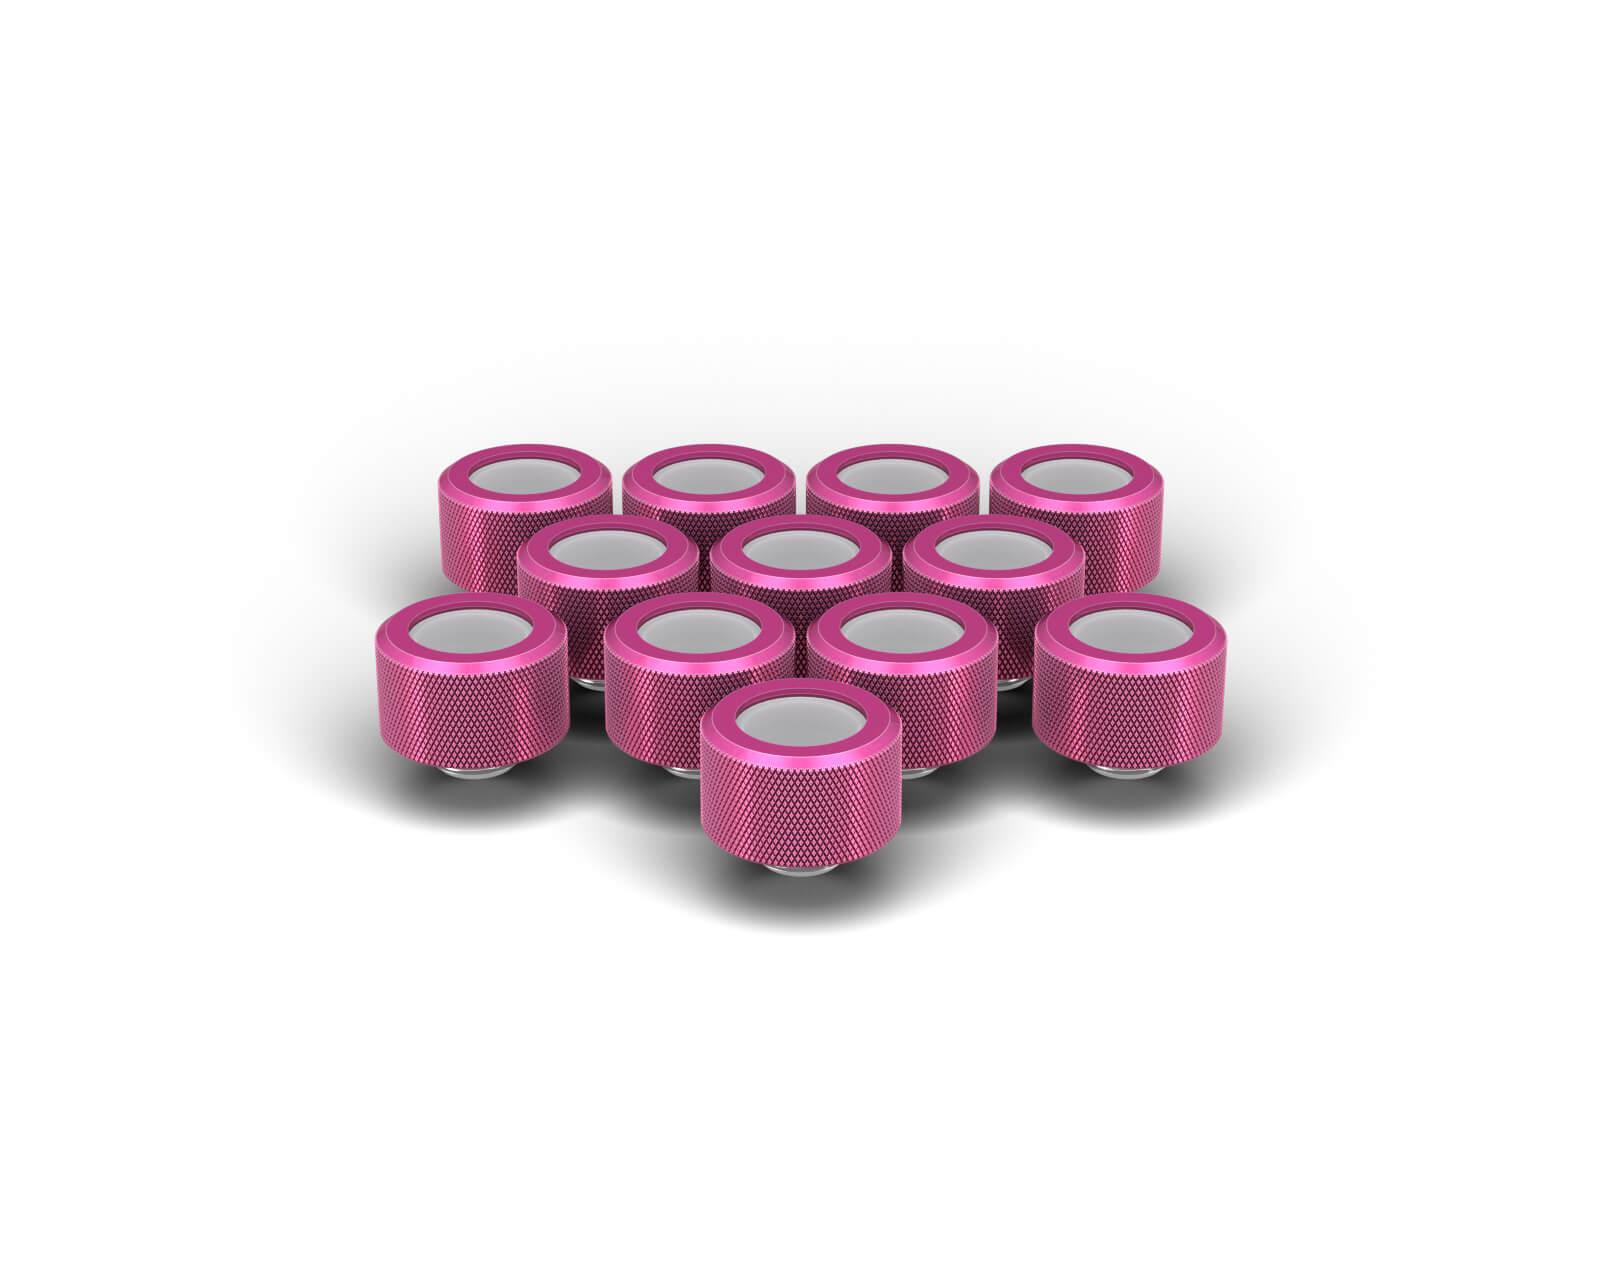 PrimoChill 16mm OD Rigid SX Fitting - 12 Pack - PrimoChill - KEEPING IT COOL Candy Pink